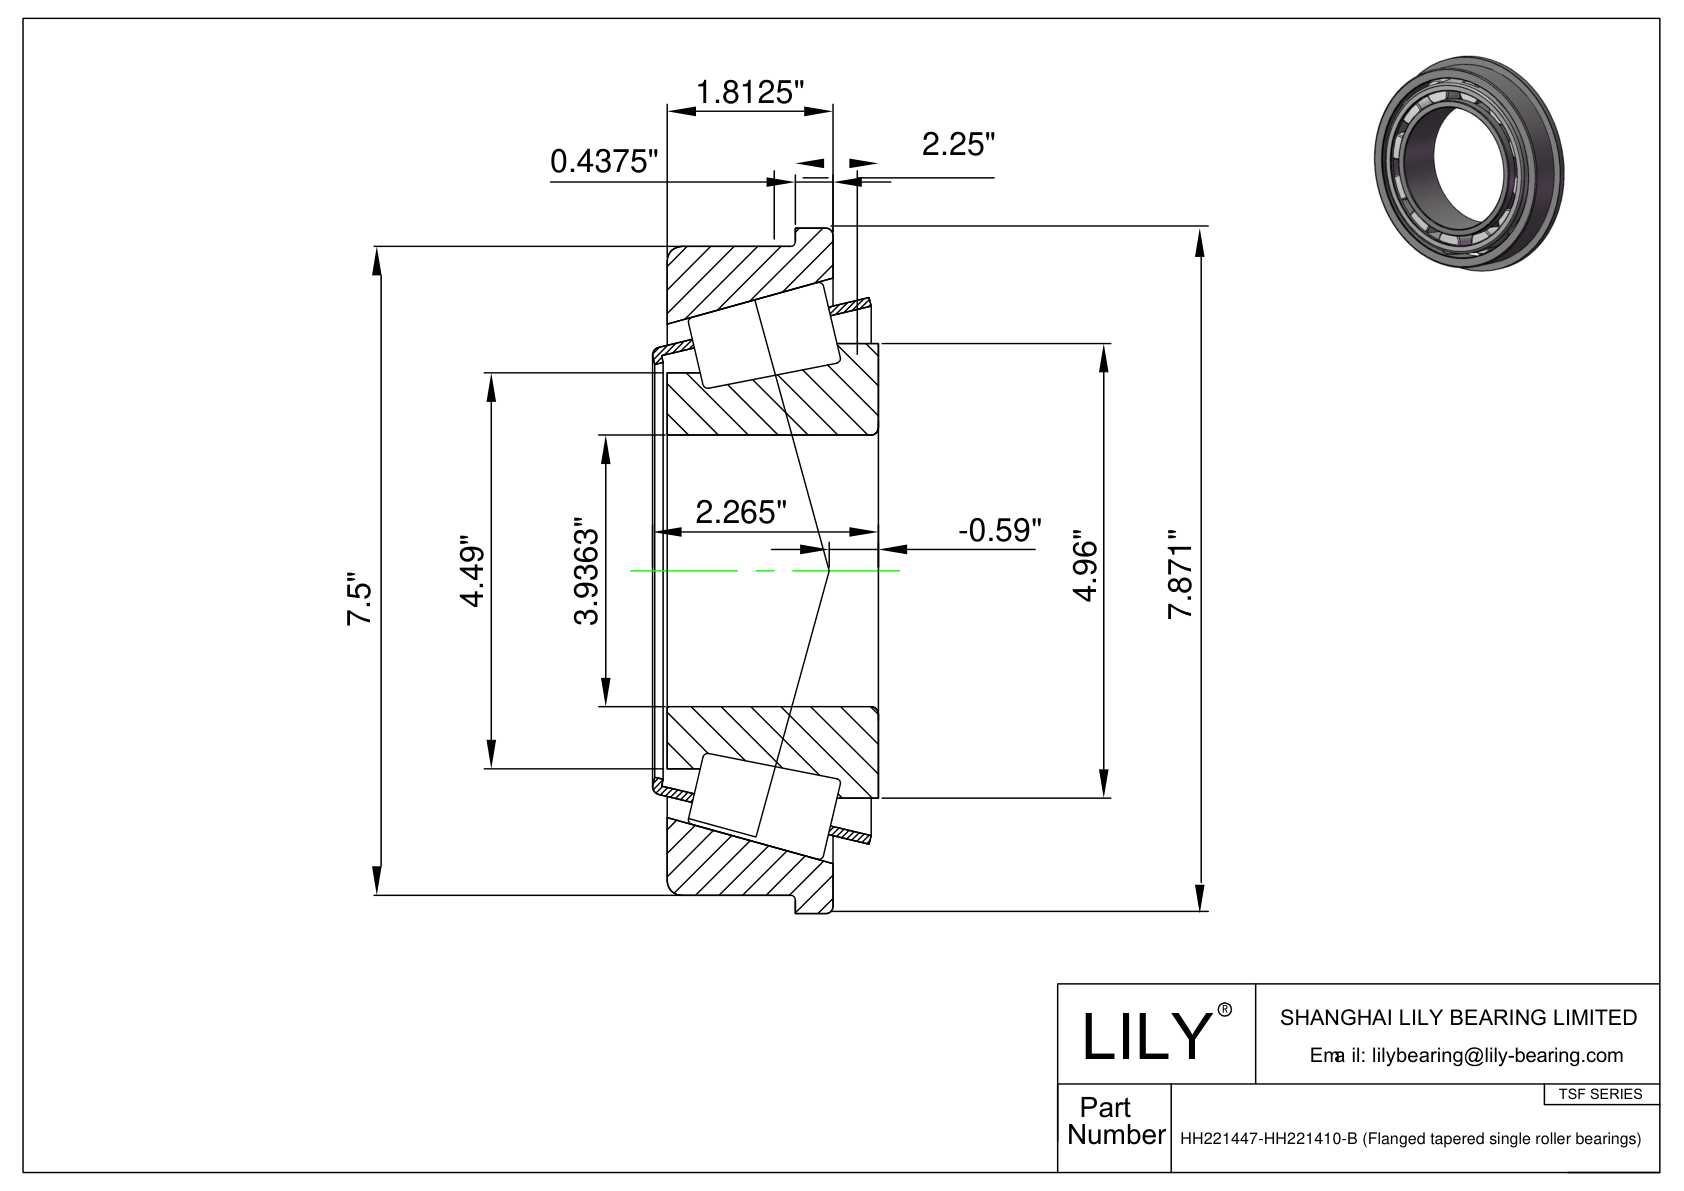 HH221447-HH221410-B TSF (Tapered Single Roller Bearings with Flange) (Imperial) cad drawing